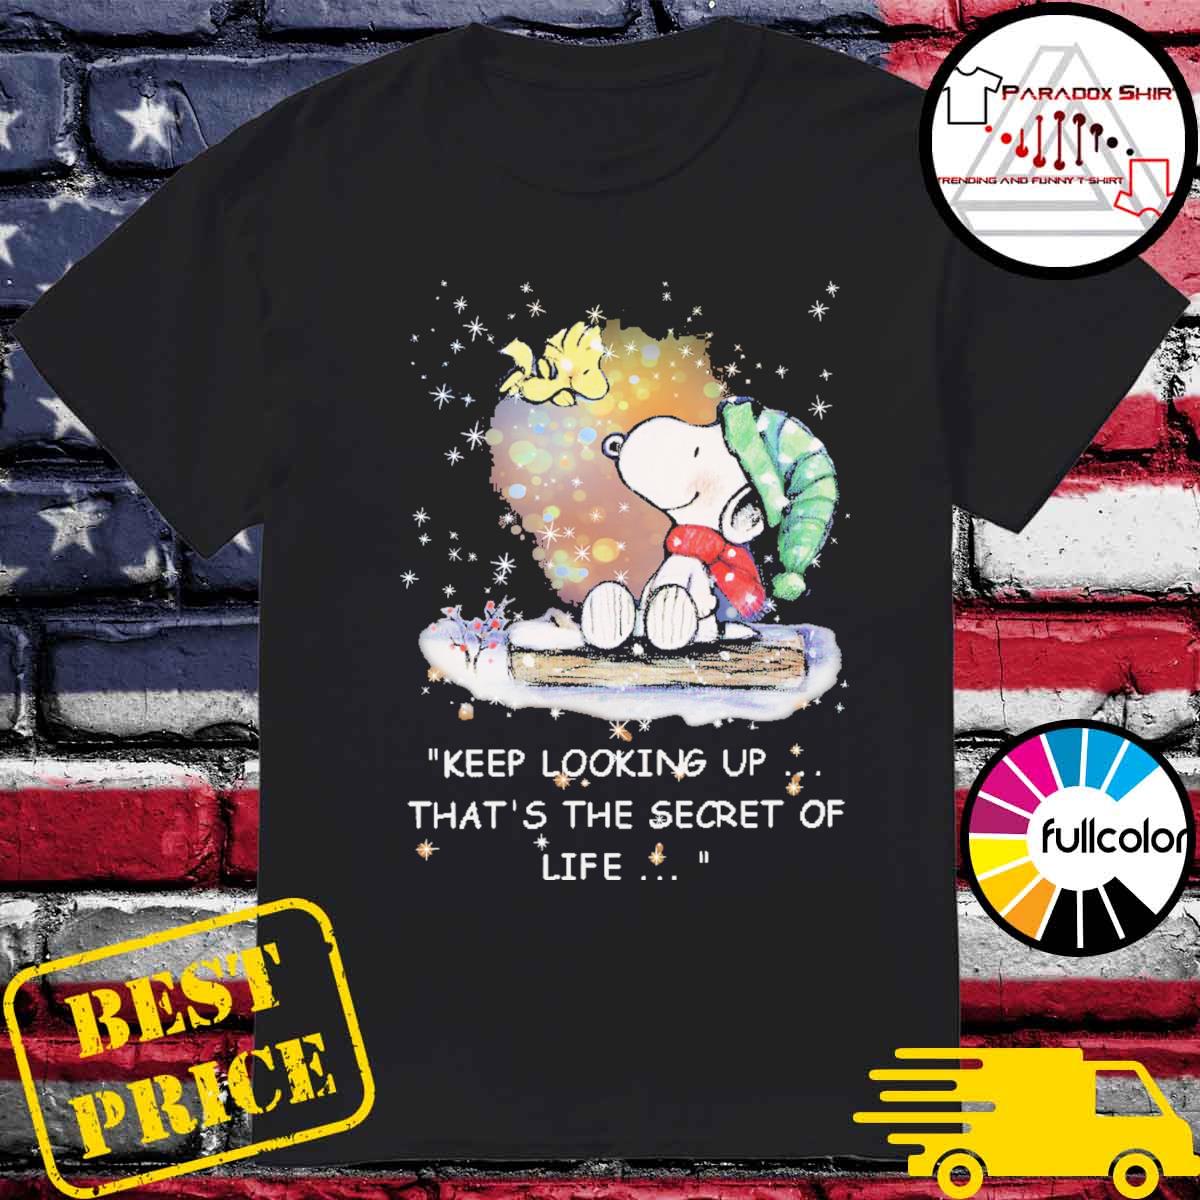 Snoopy And Woodstock Keep Looking Up That S The Secret Of Life Shirt Hoodie Sweater Long Sleeve And Tank Top